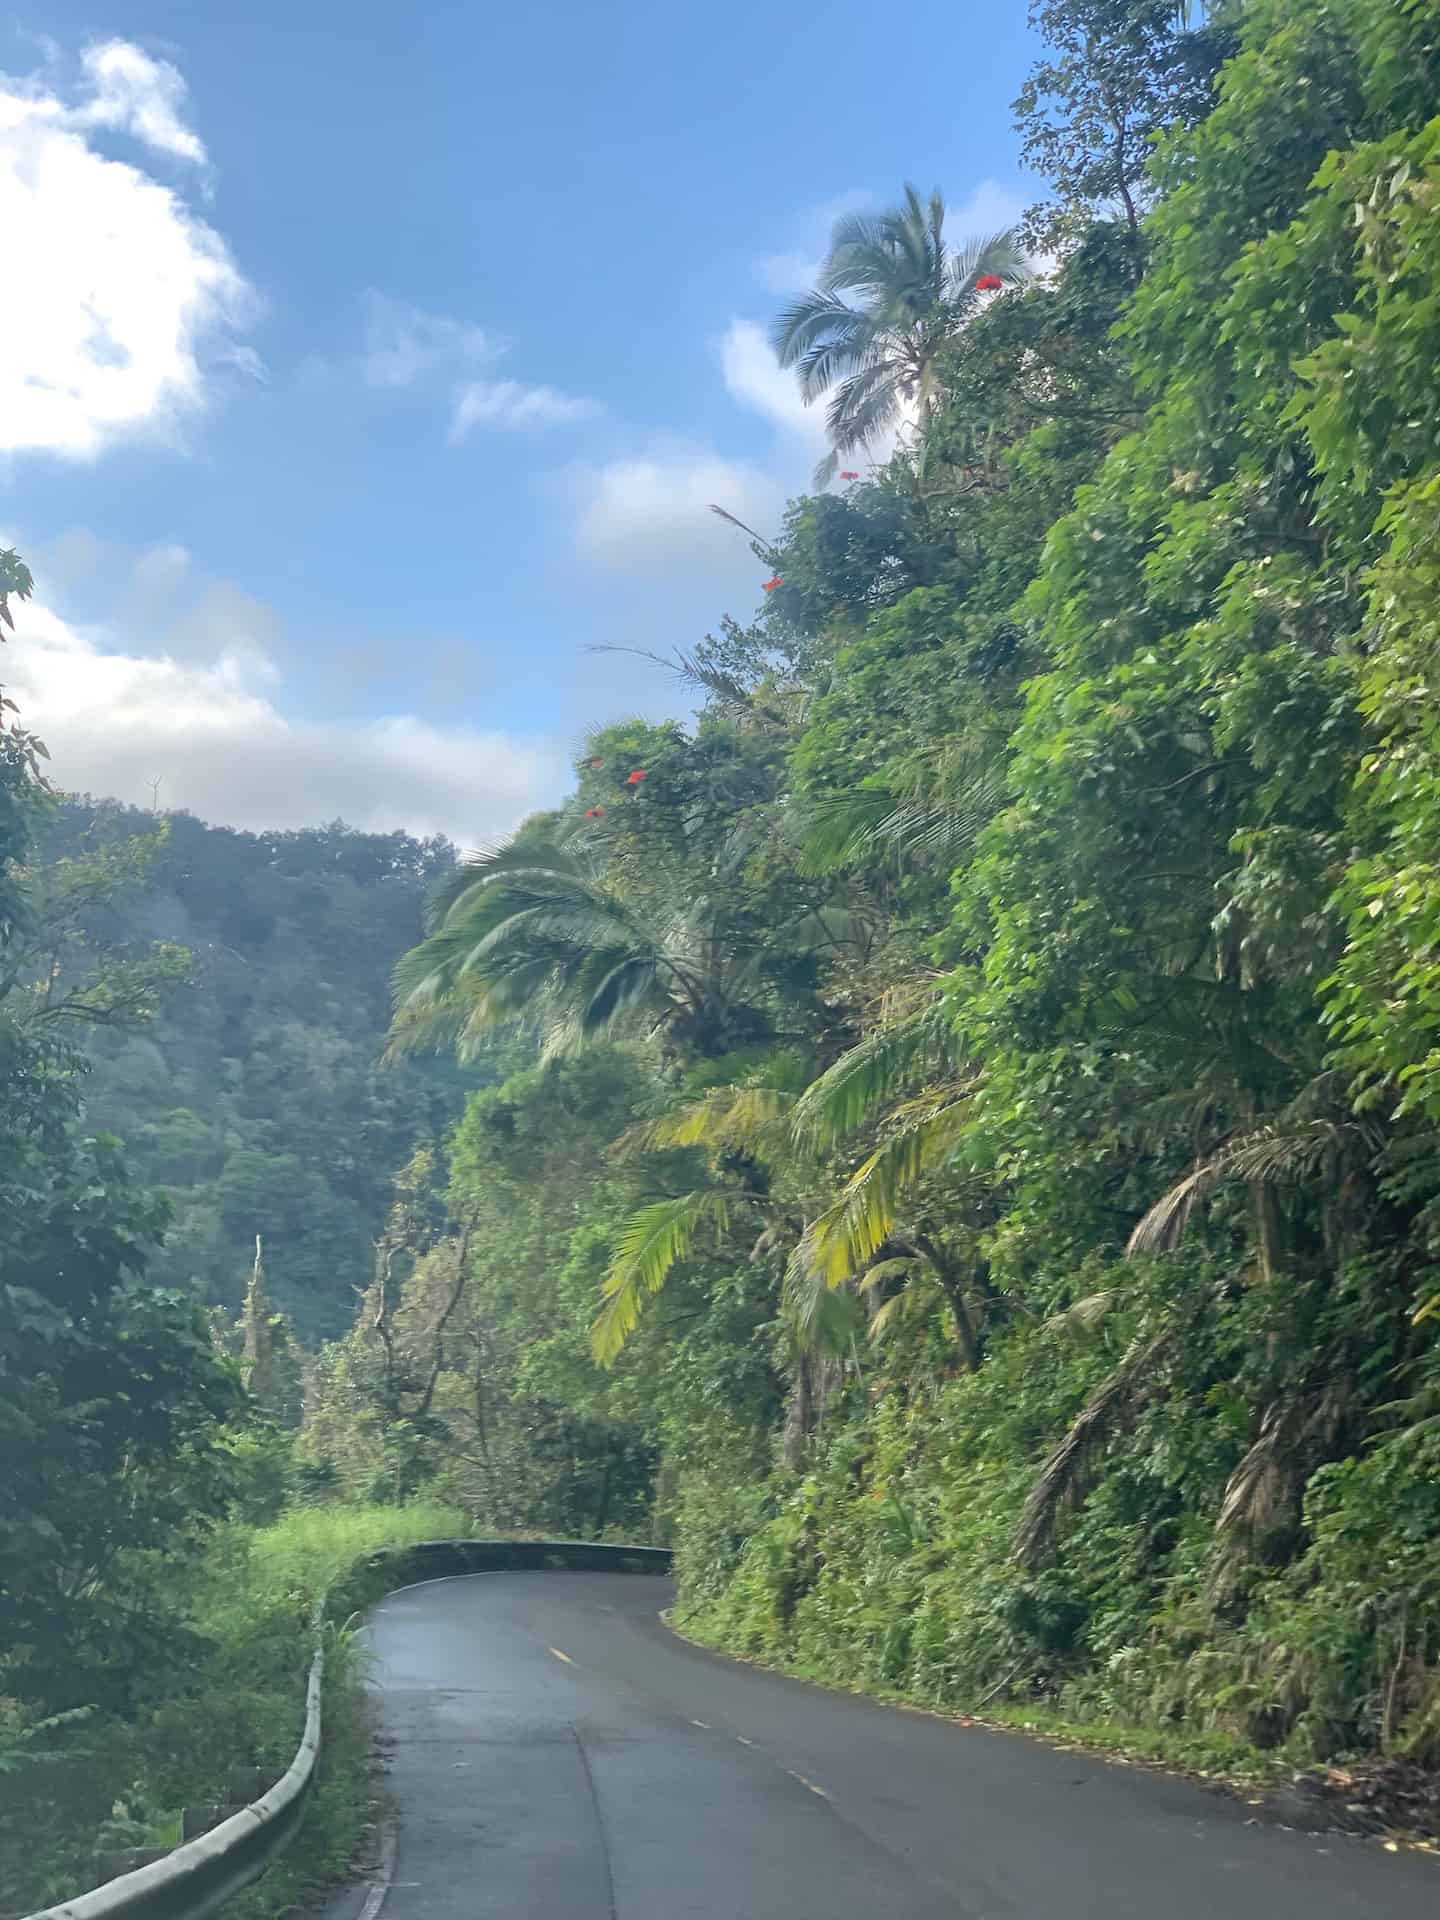 OUR FAVORITE ROAD TO HANA STOPS